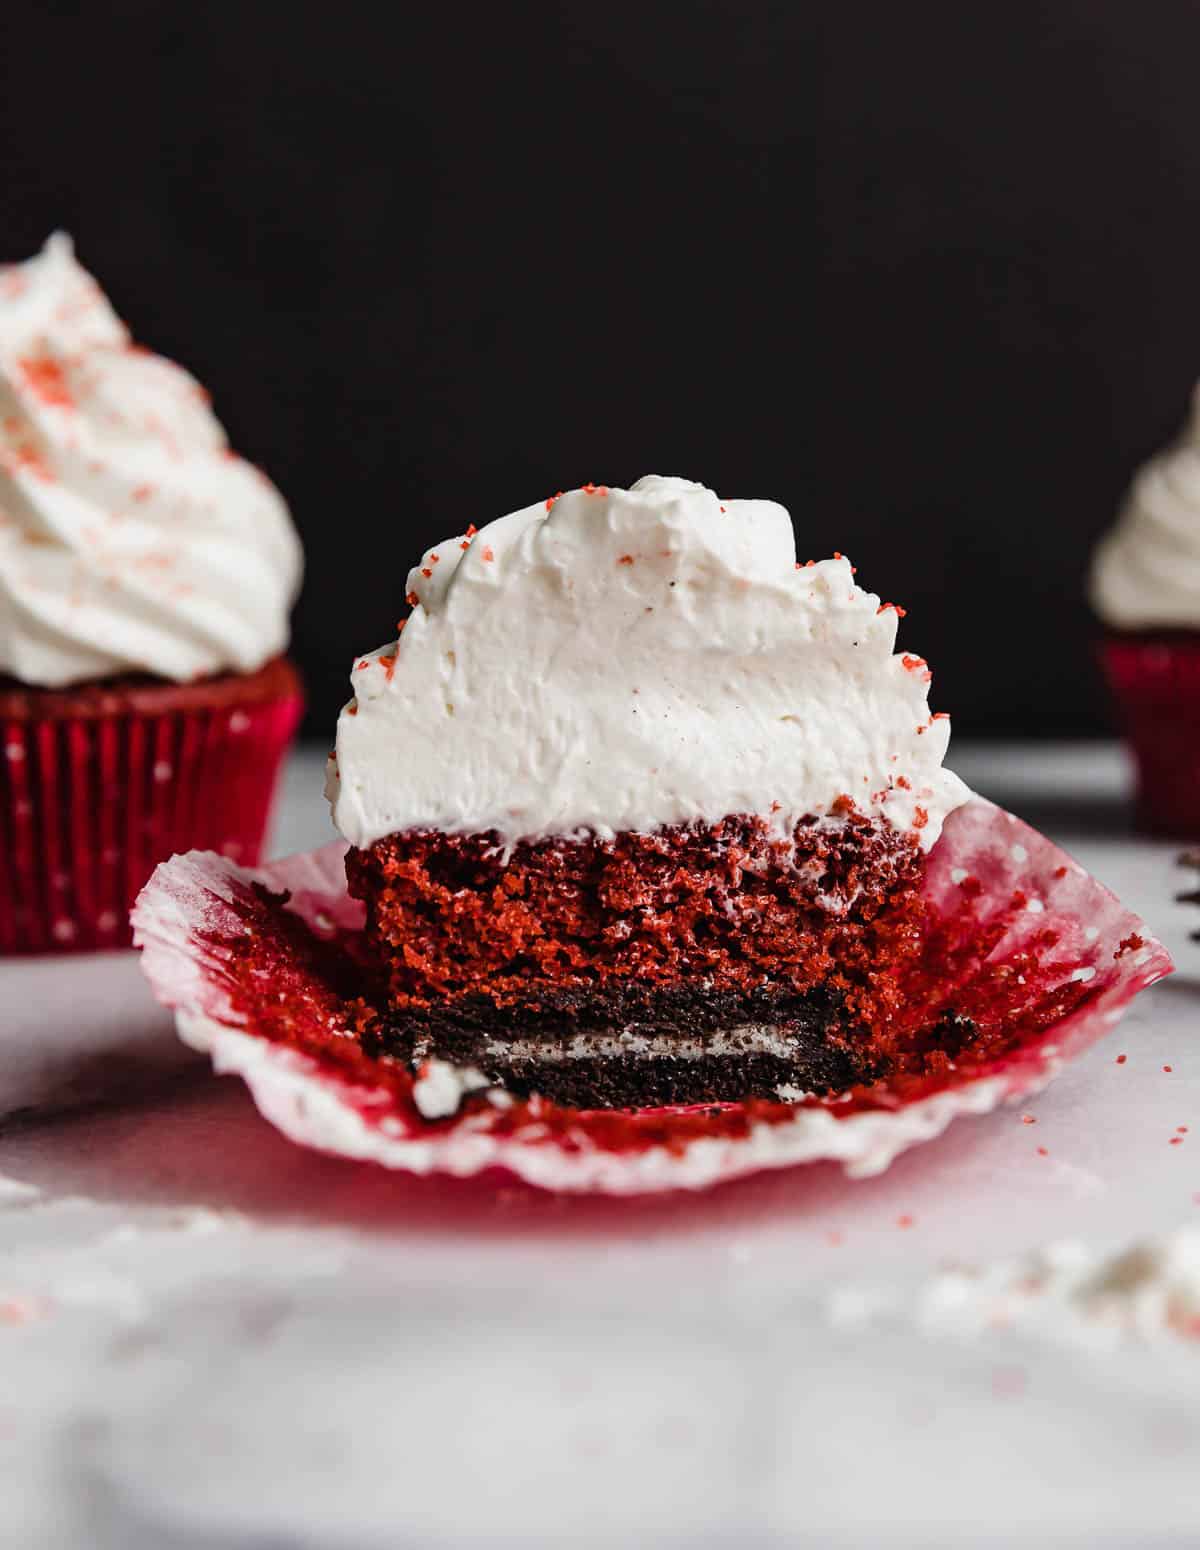 A red velvet cupcake baked on top of an Oreo.